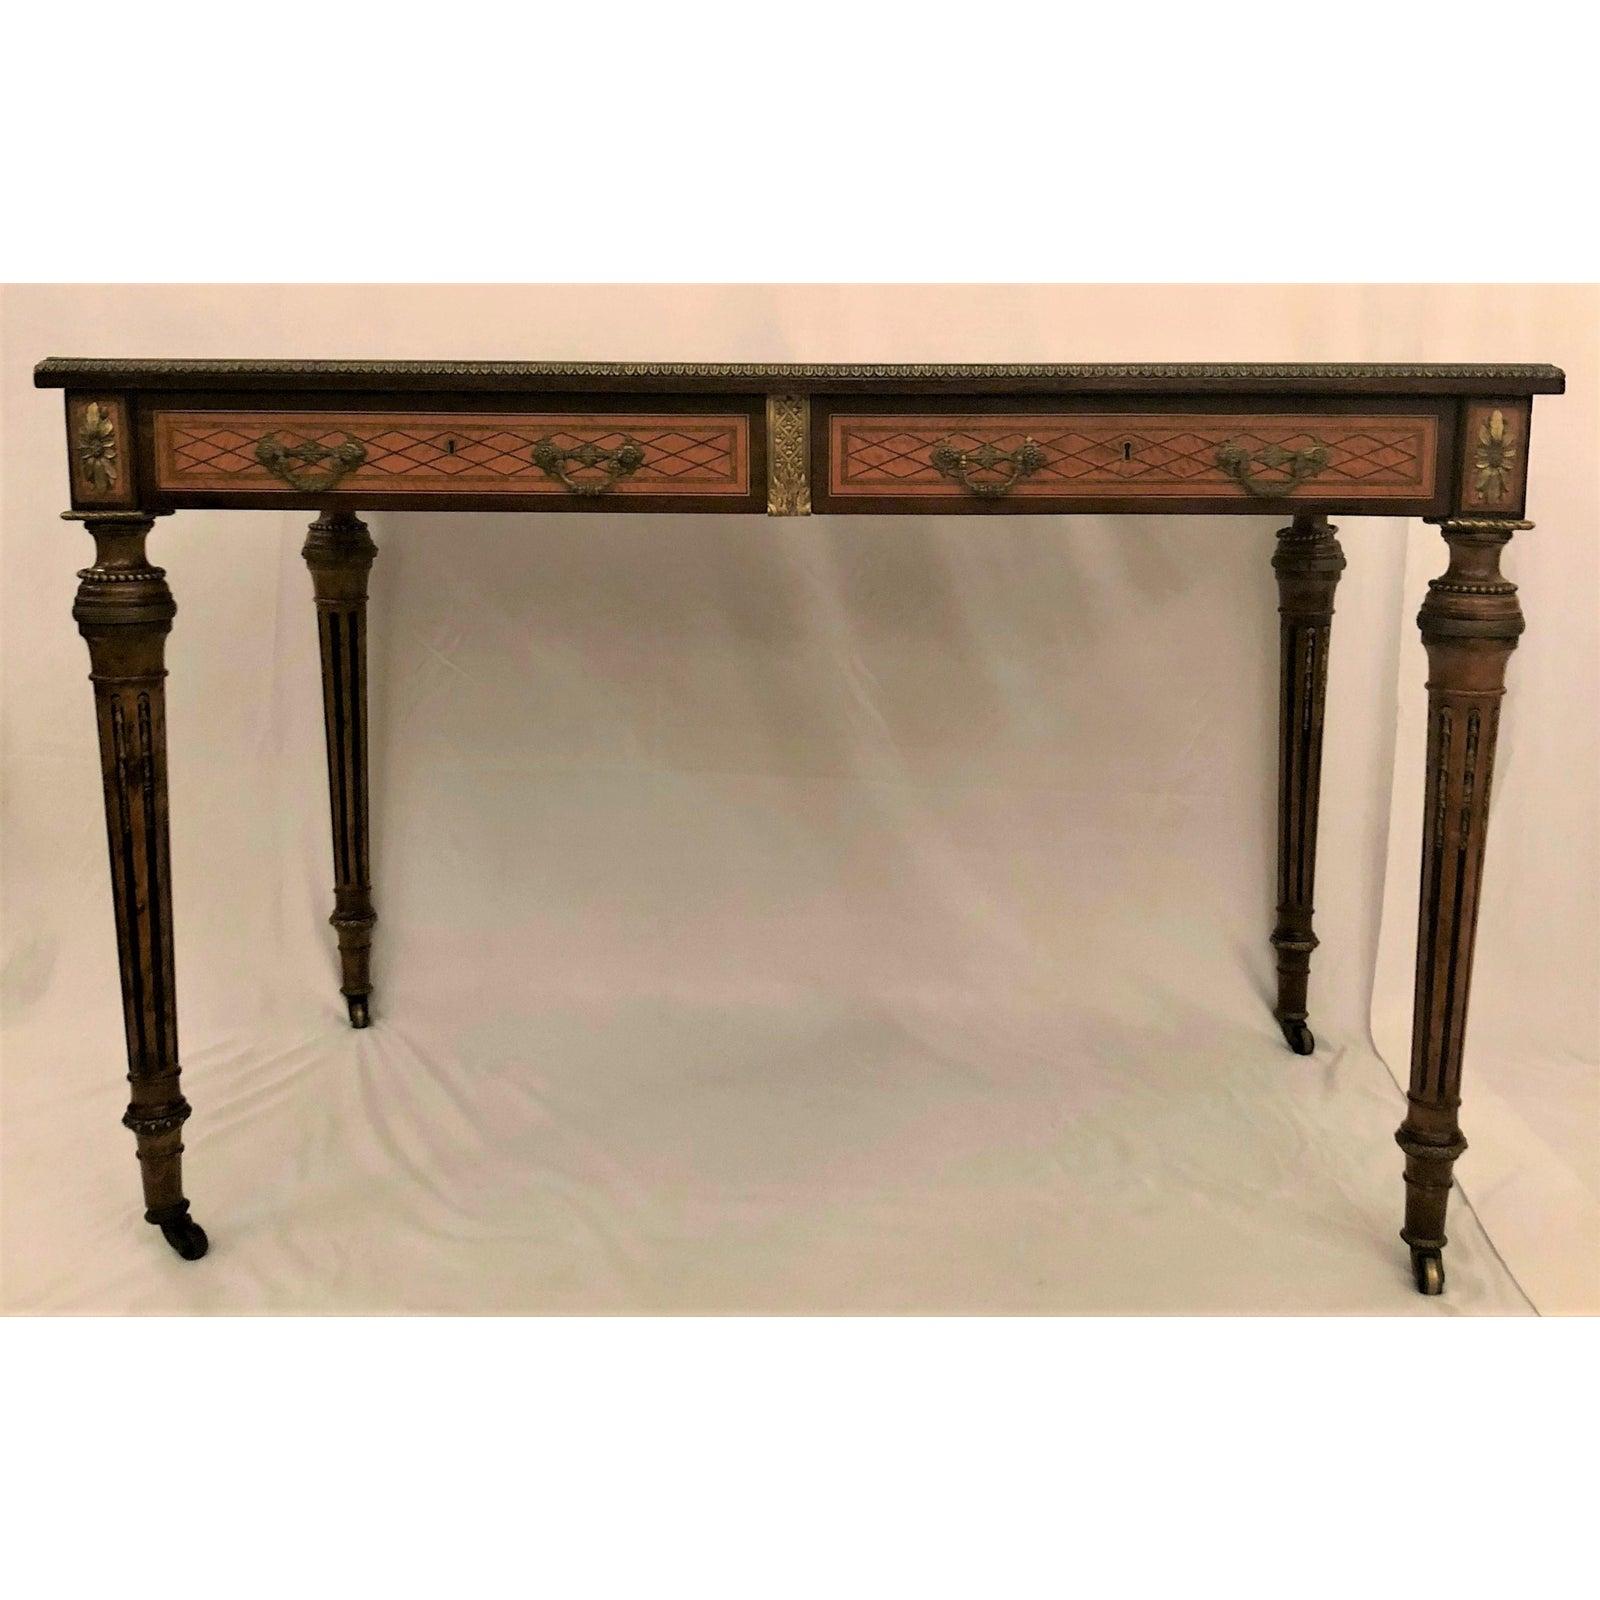 Antique 19th Century French Museum Quality Inlaid Writing Table with Bronze Trim For Sale 1